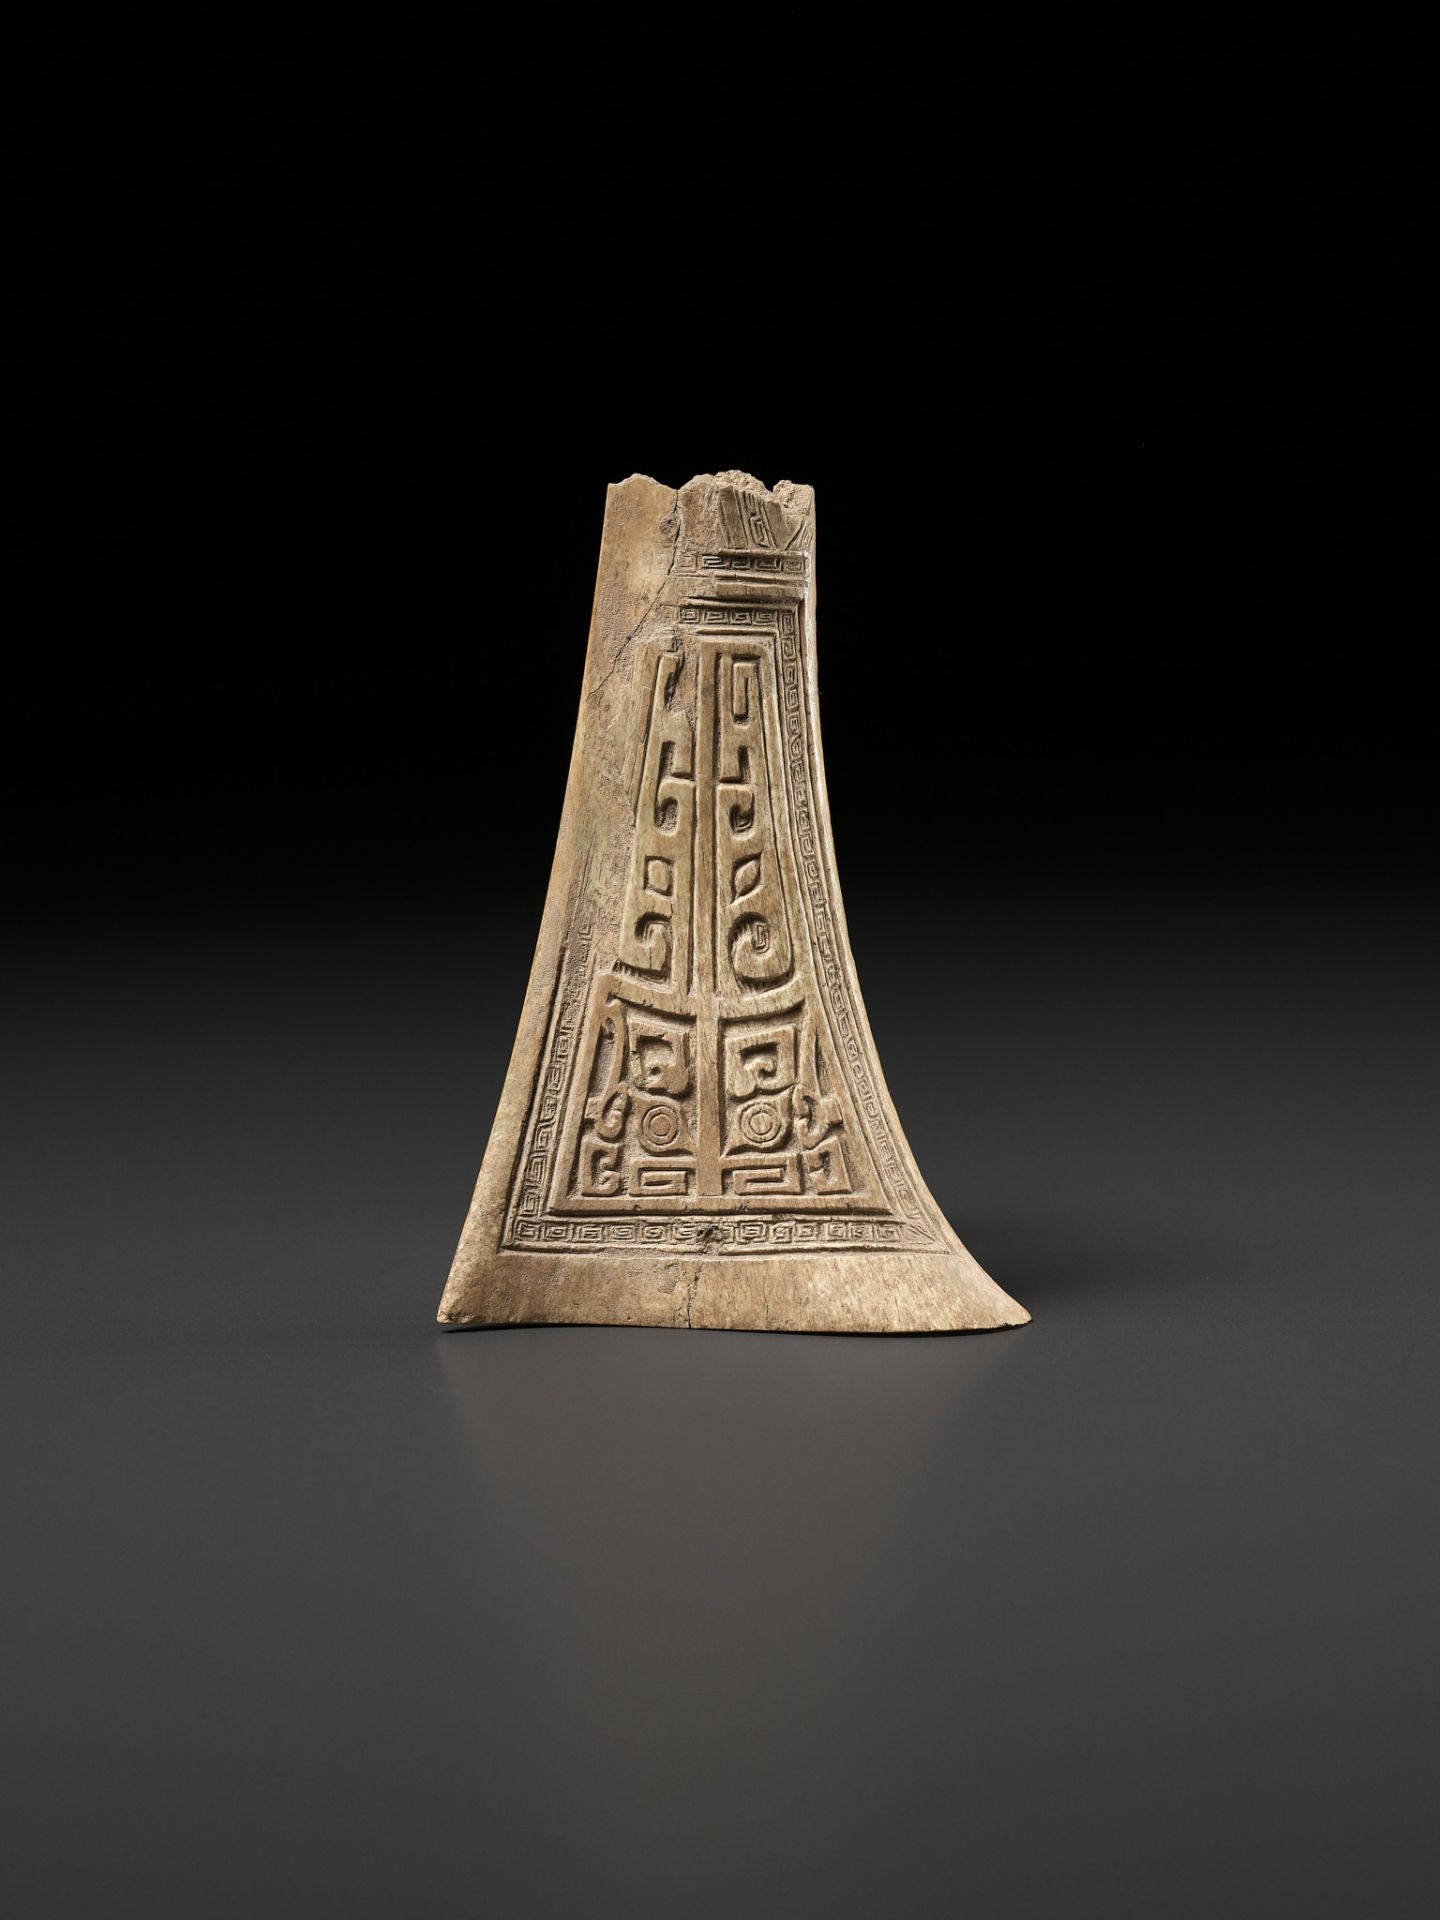 AN ARCHAIC CEREMONIAL BONE CARVING, SHANG DYNASTY - Image 3 of 17